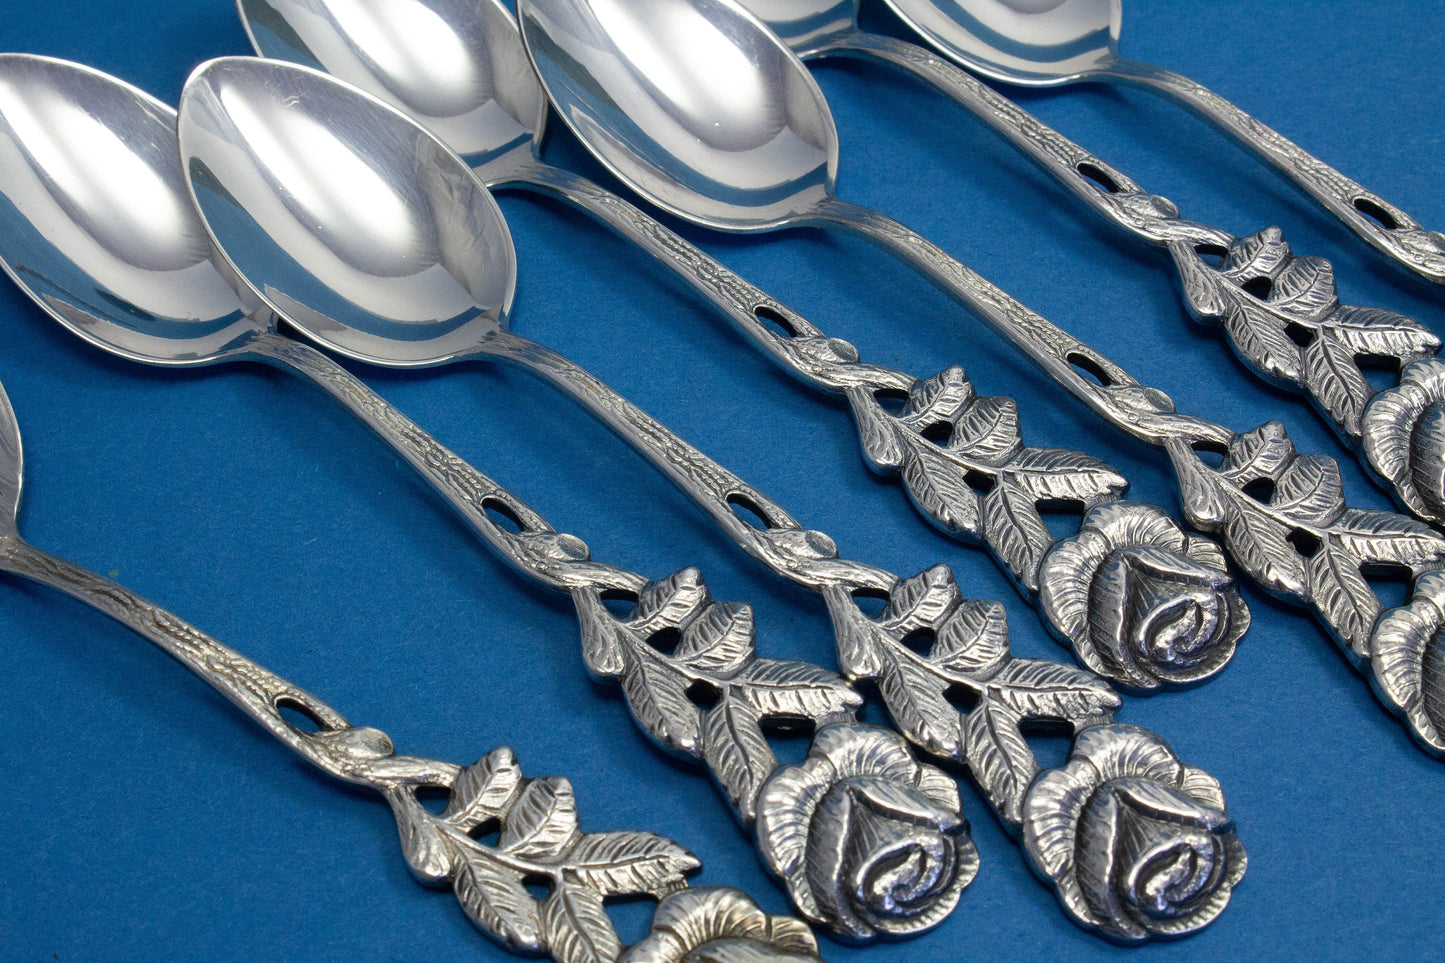 6 small mocha spoons with a matching sugar spoon